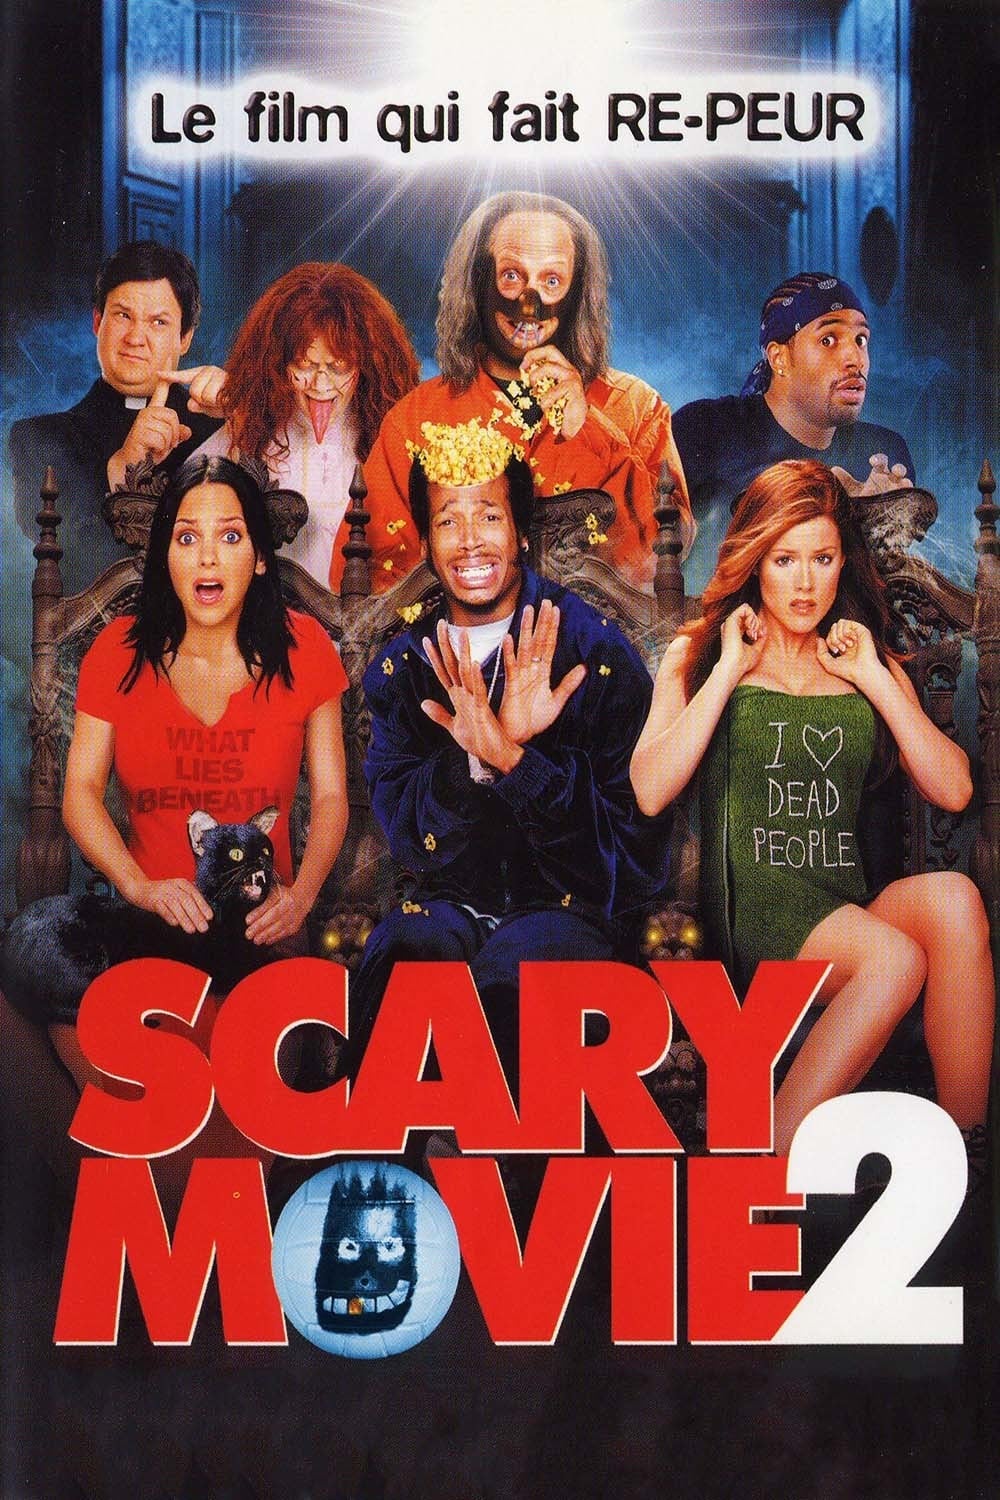 Affiche du film Scary Movie 2 poster